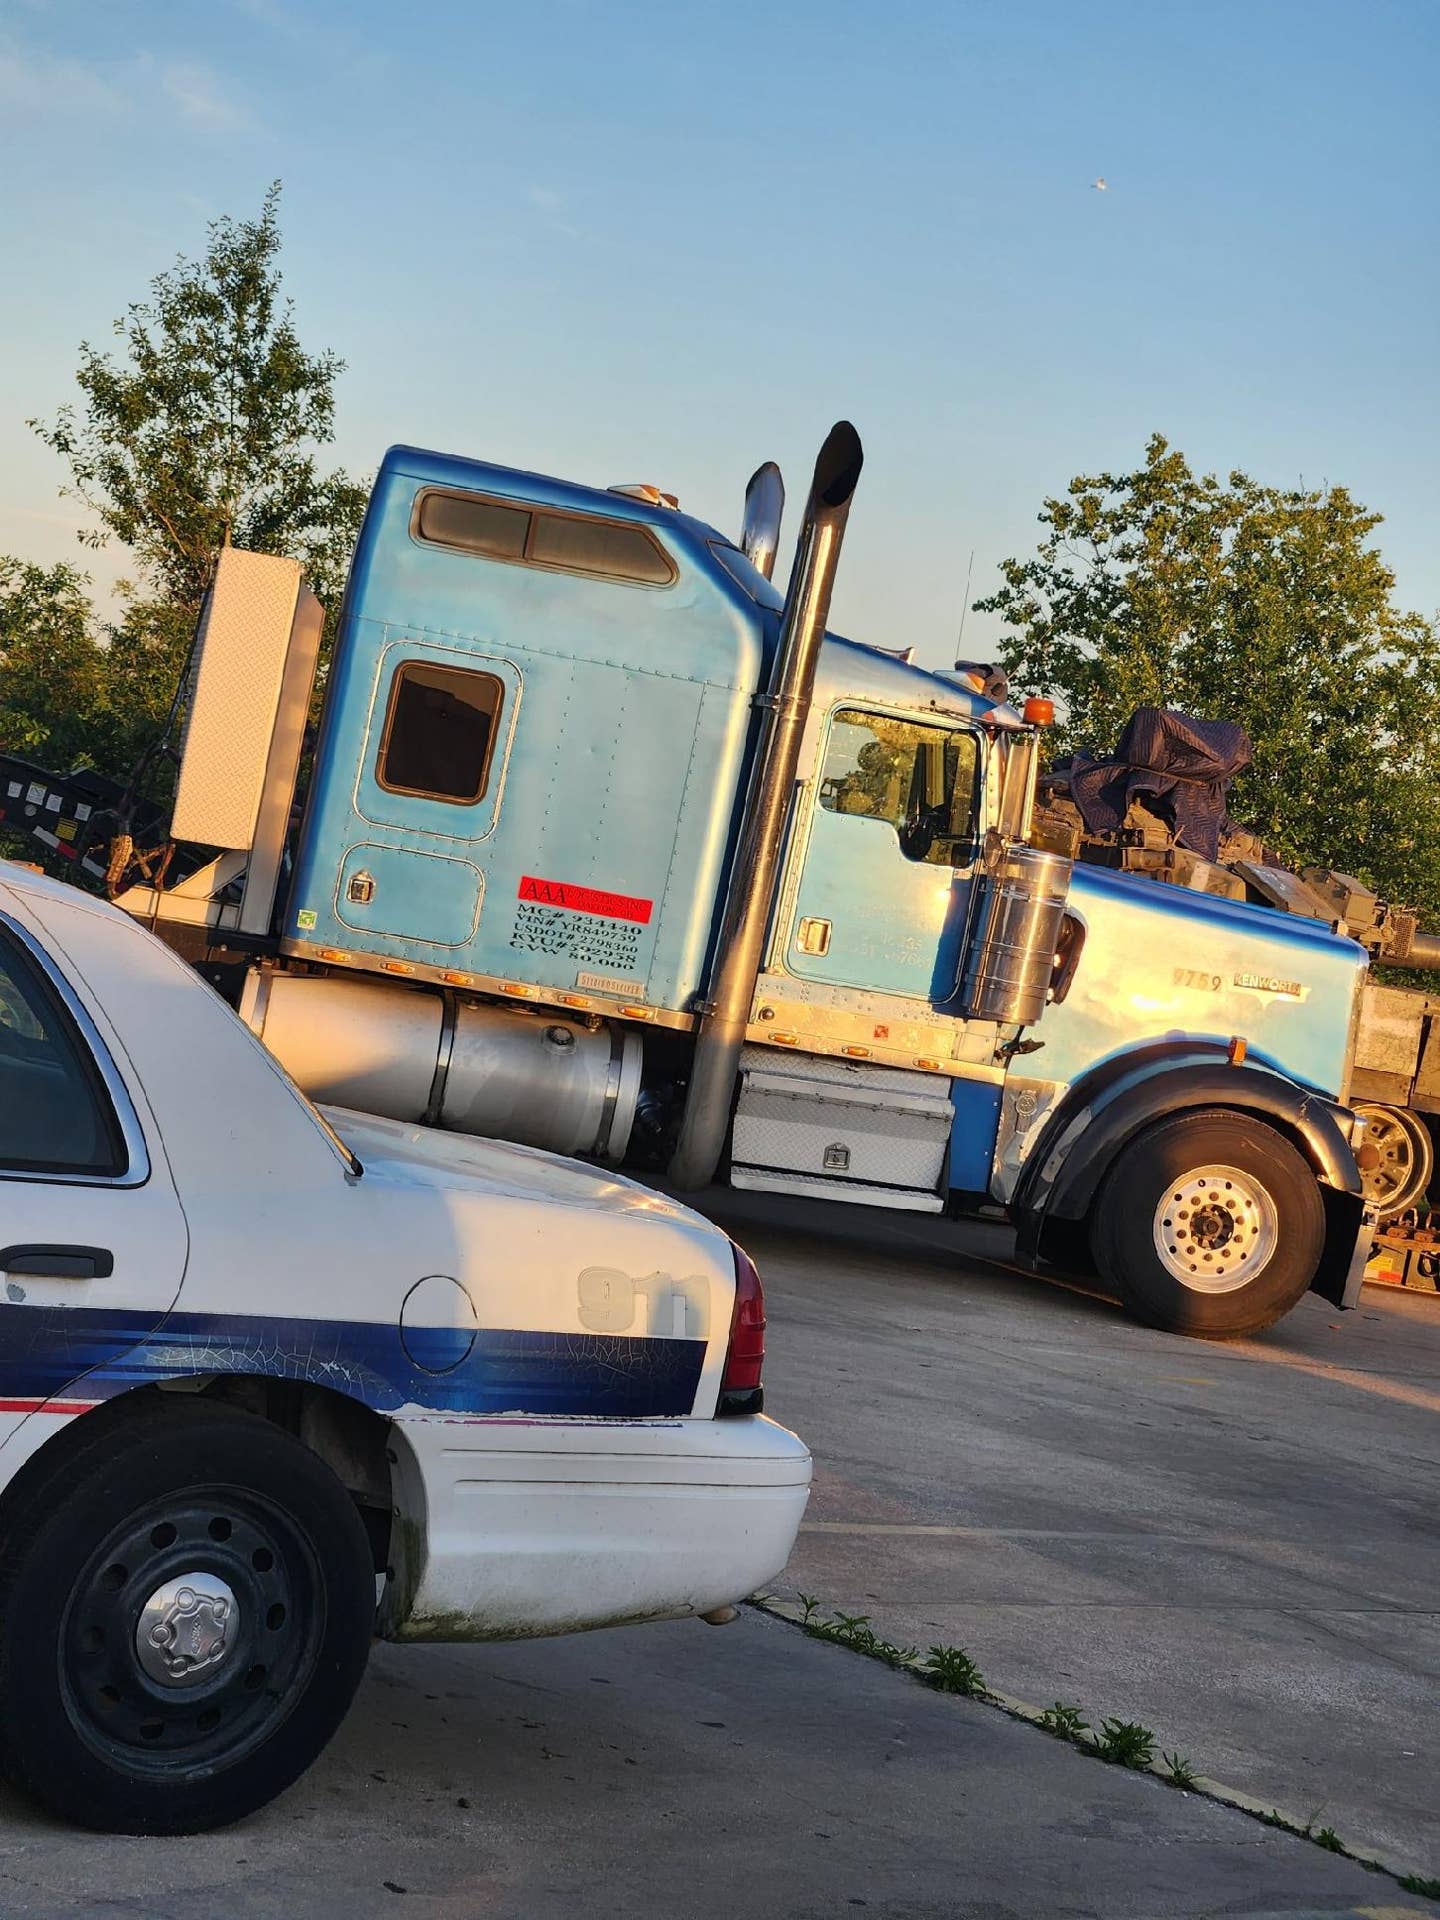 A truck from AAA Logistics in Dayton, Ohio, hauled away the tank last night. (Courtesy Cody Sellers)